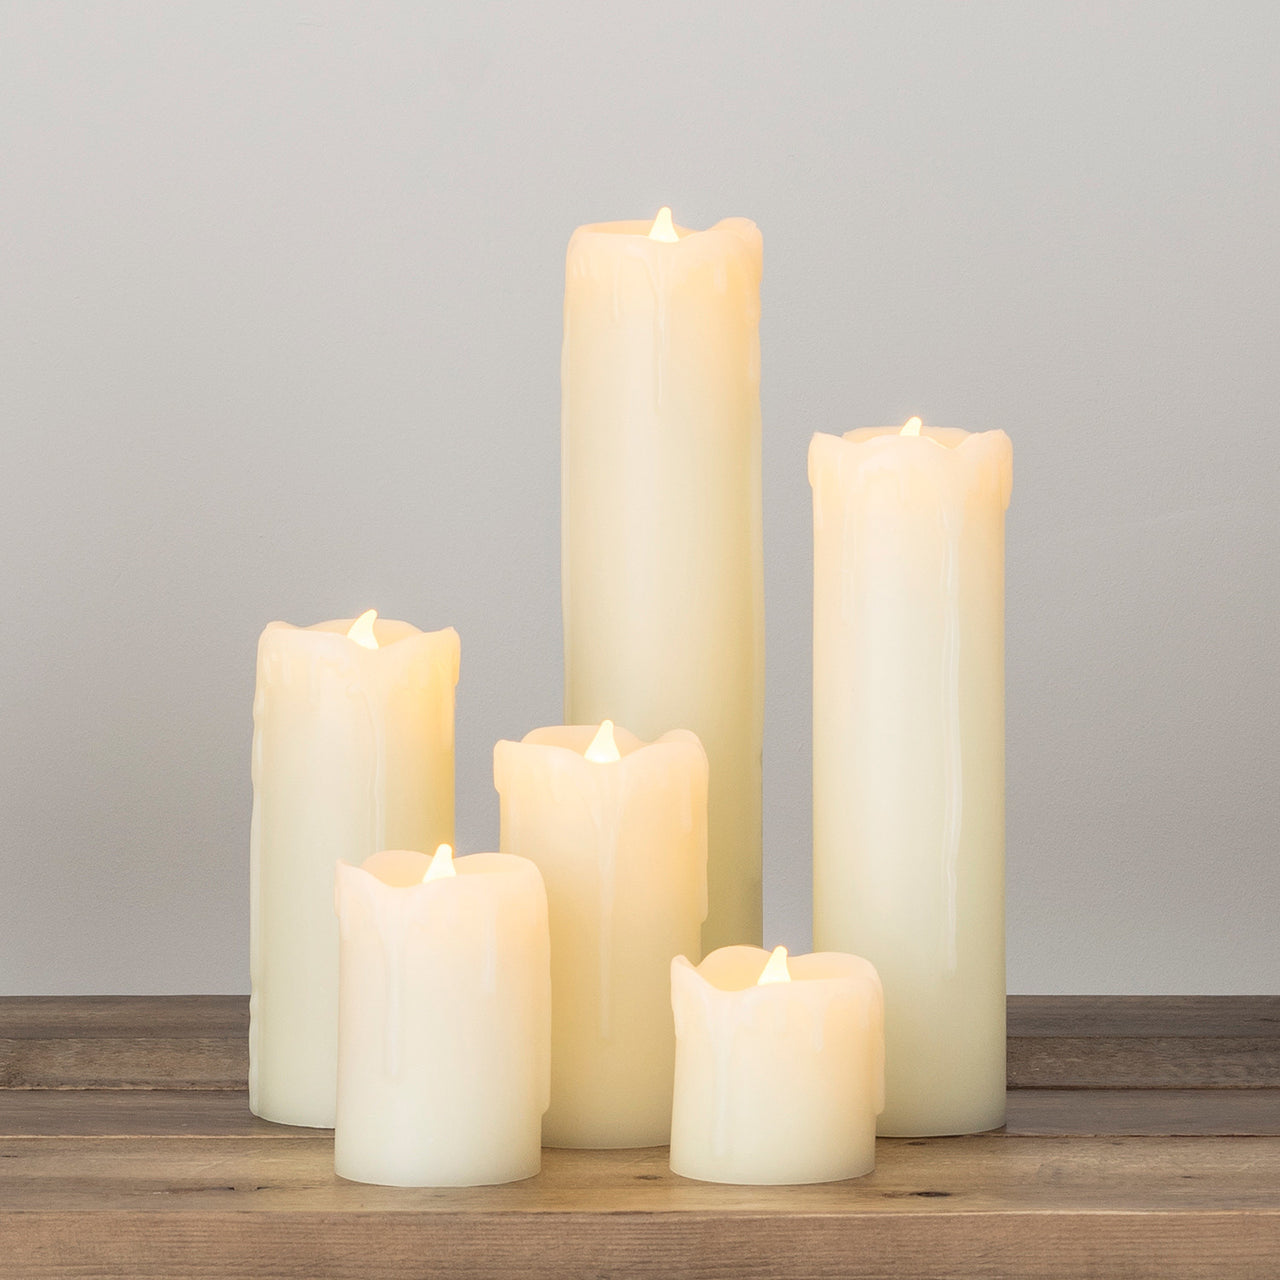 6 Slim LED Battery Candles With Dripping Wax